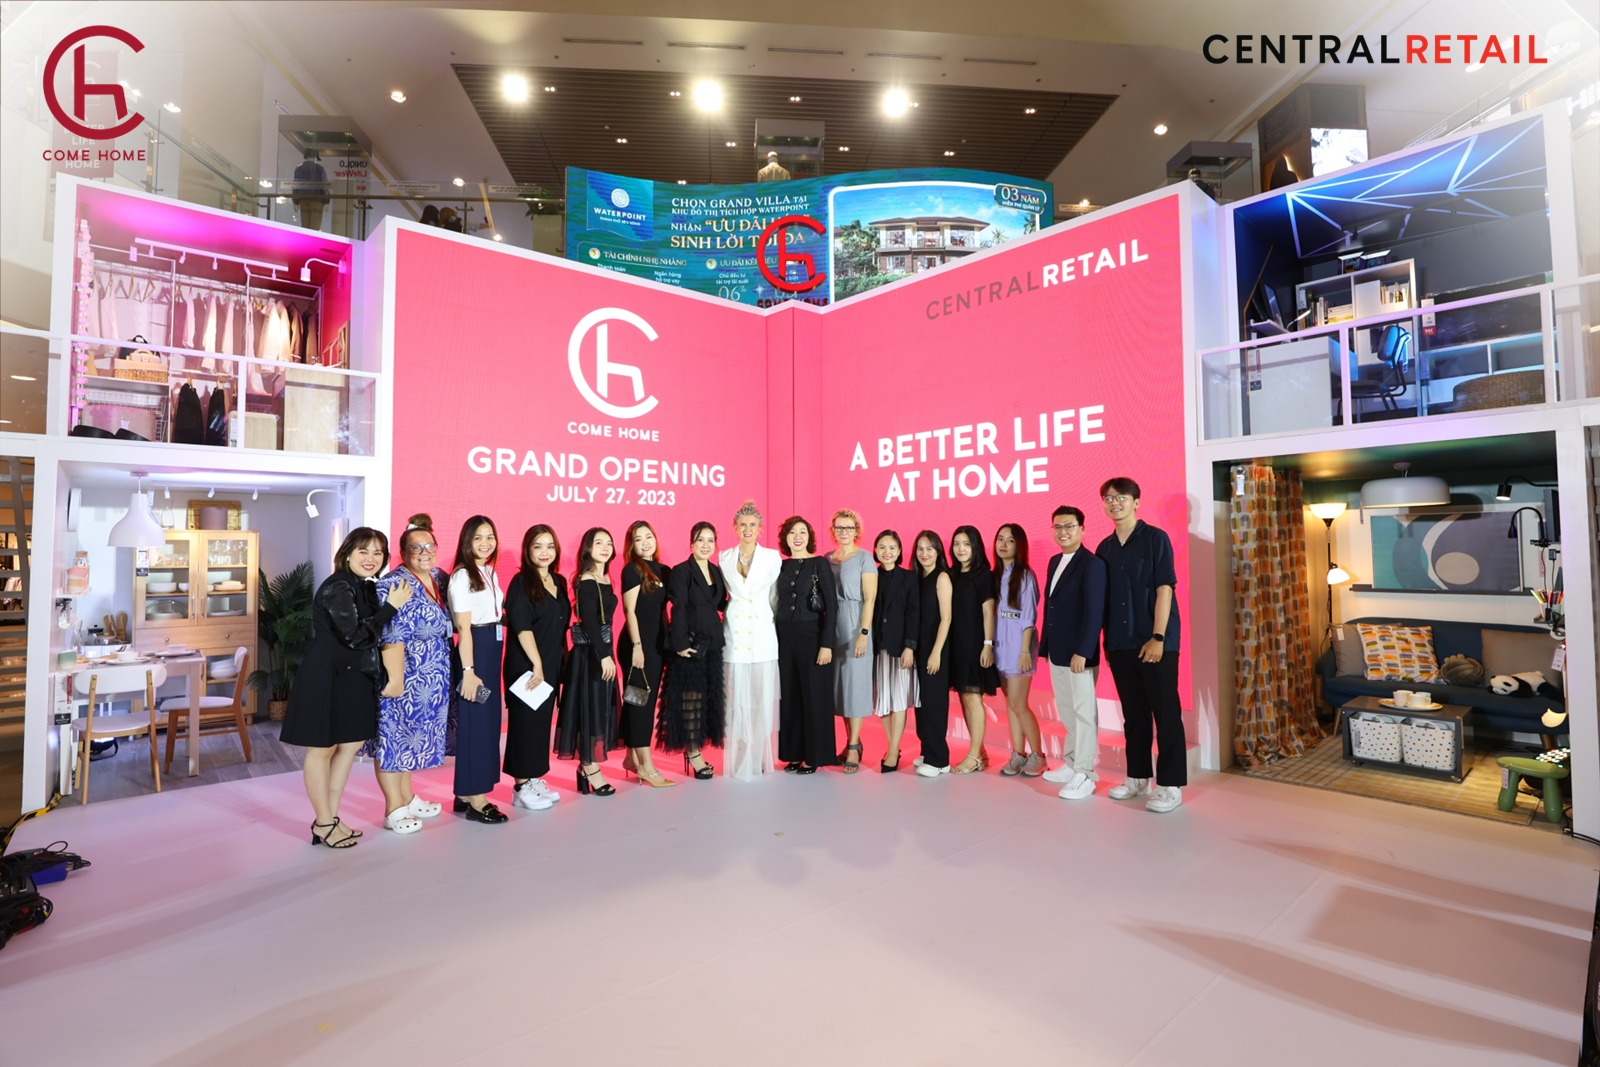 Central Retail in Vietnam hosts the grand opening ceremony to unveil its new brand, “Come Home”